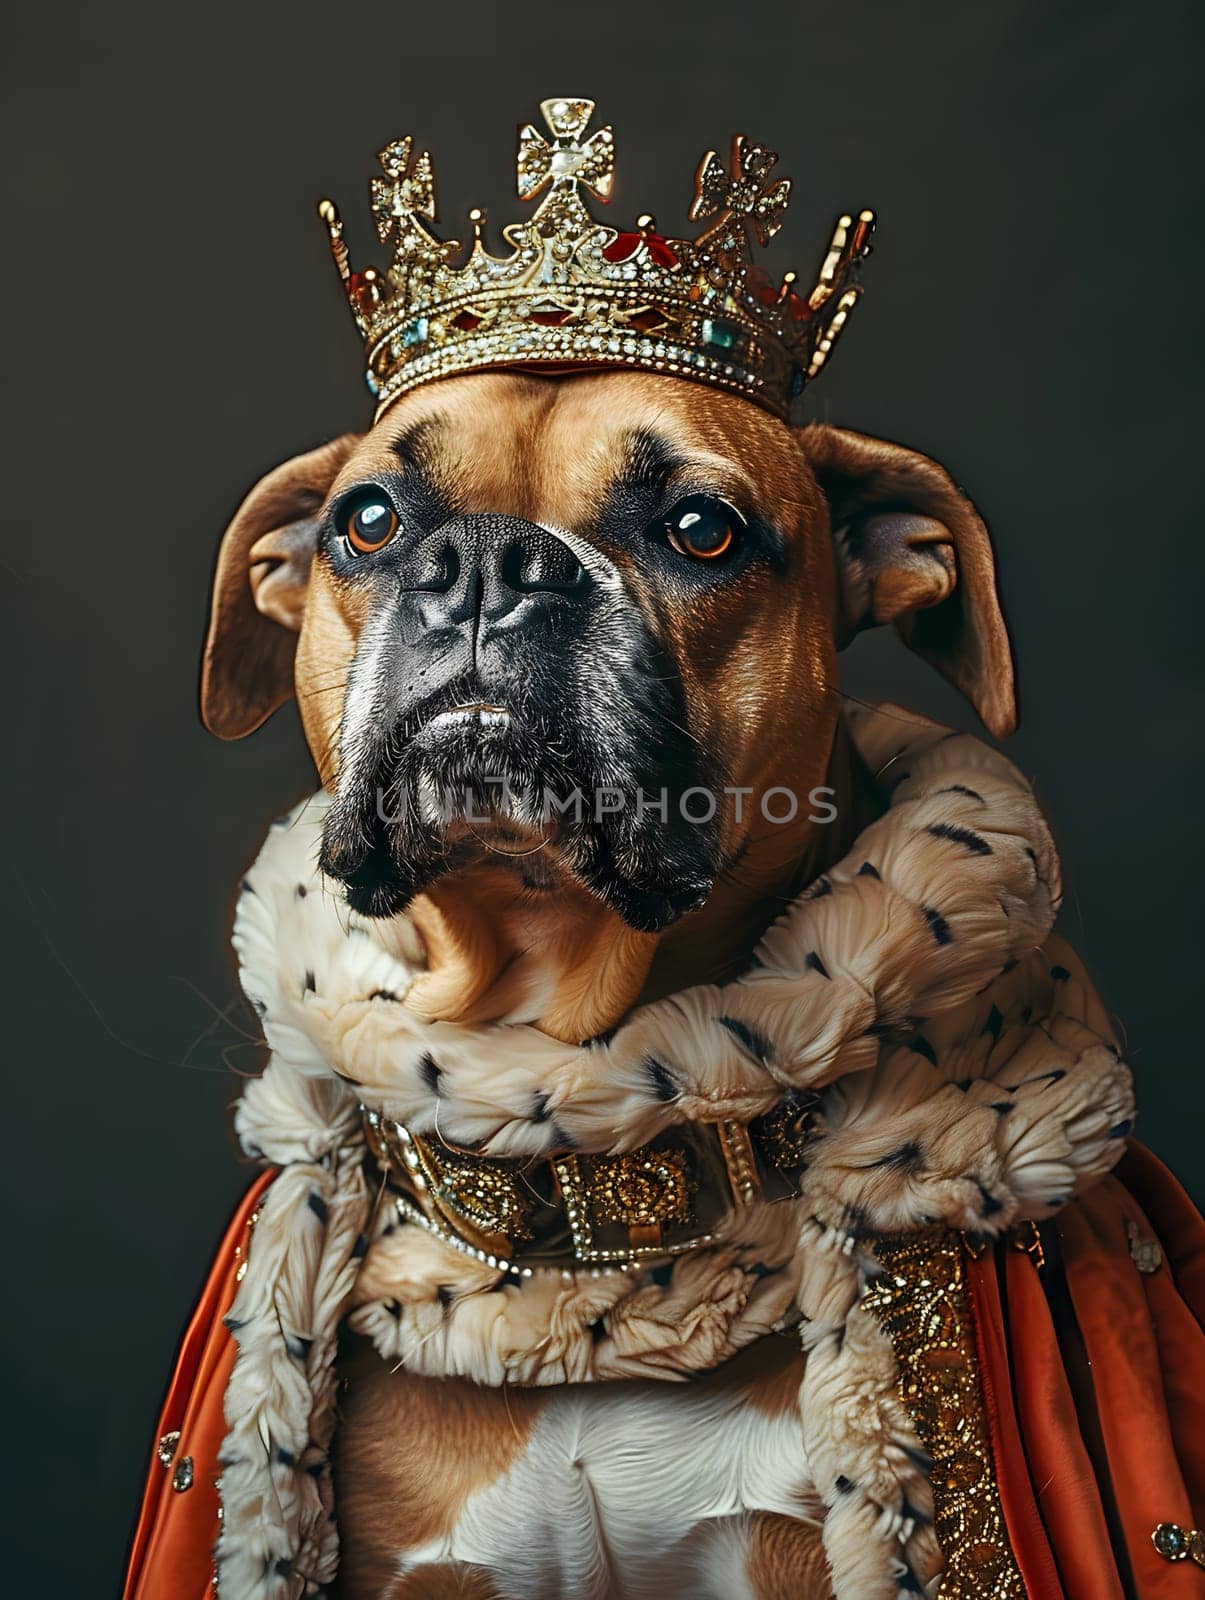 A fawn Boxer, a carnivorous dog breed, is wearing a crown and a coat. This companion dog looks majestic with its jewellery, resembling a working animal in a tiara